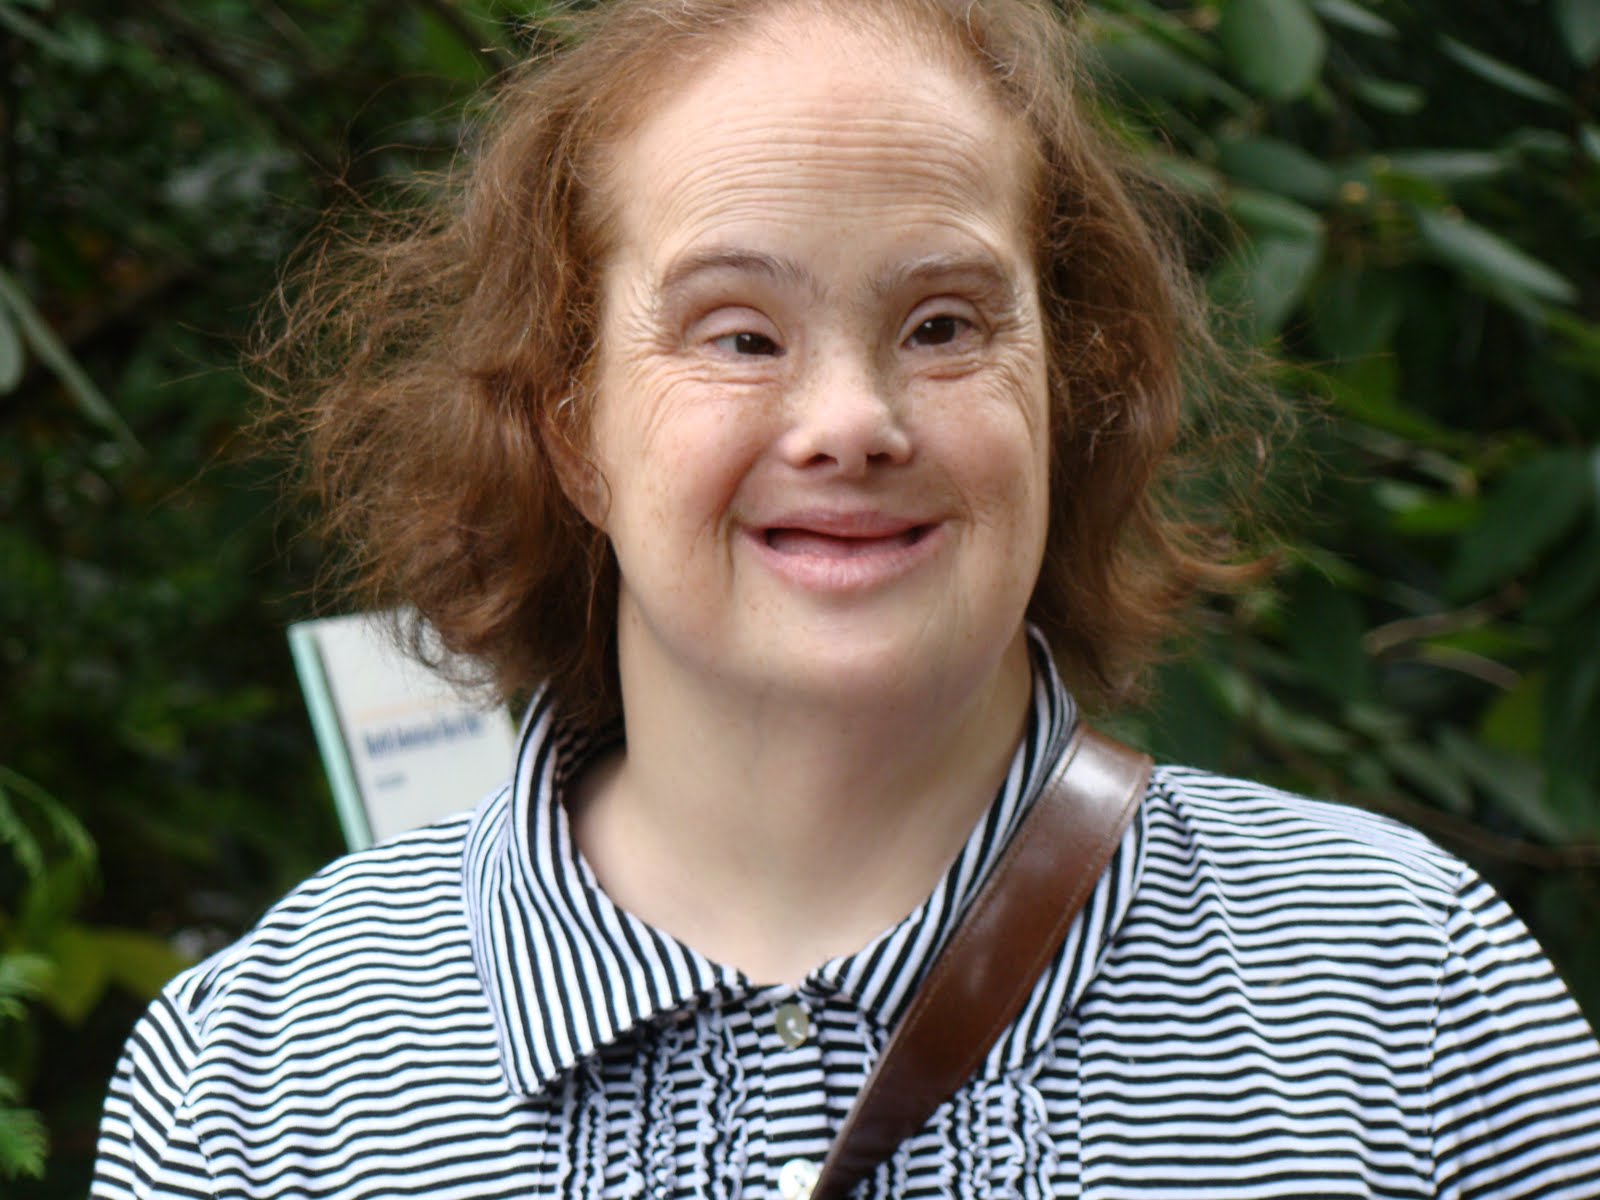 Best,+nicest+down+syndrome+lady+ever.jpg